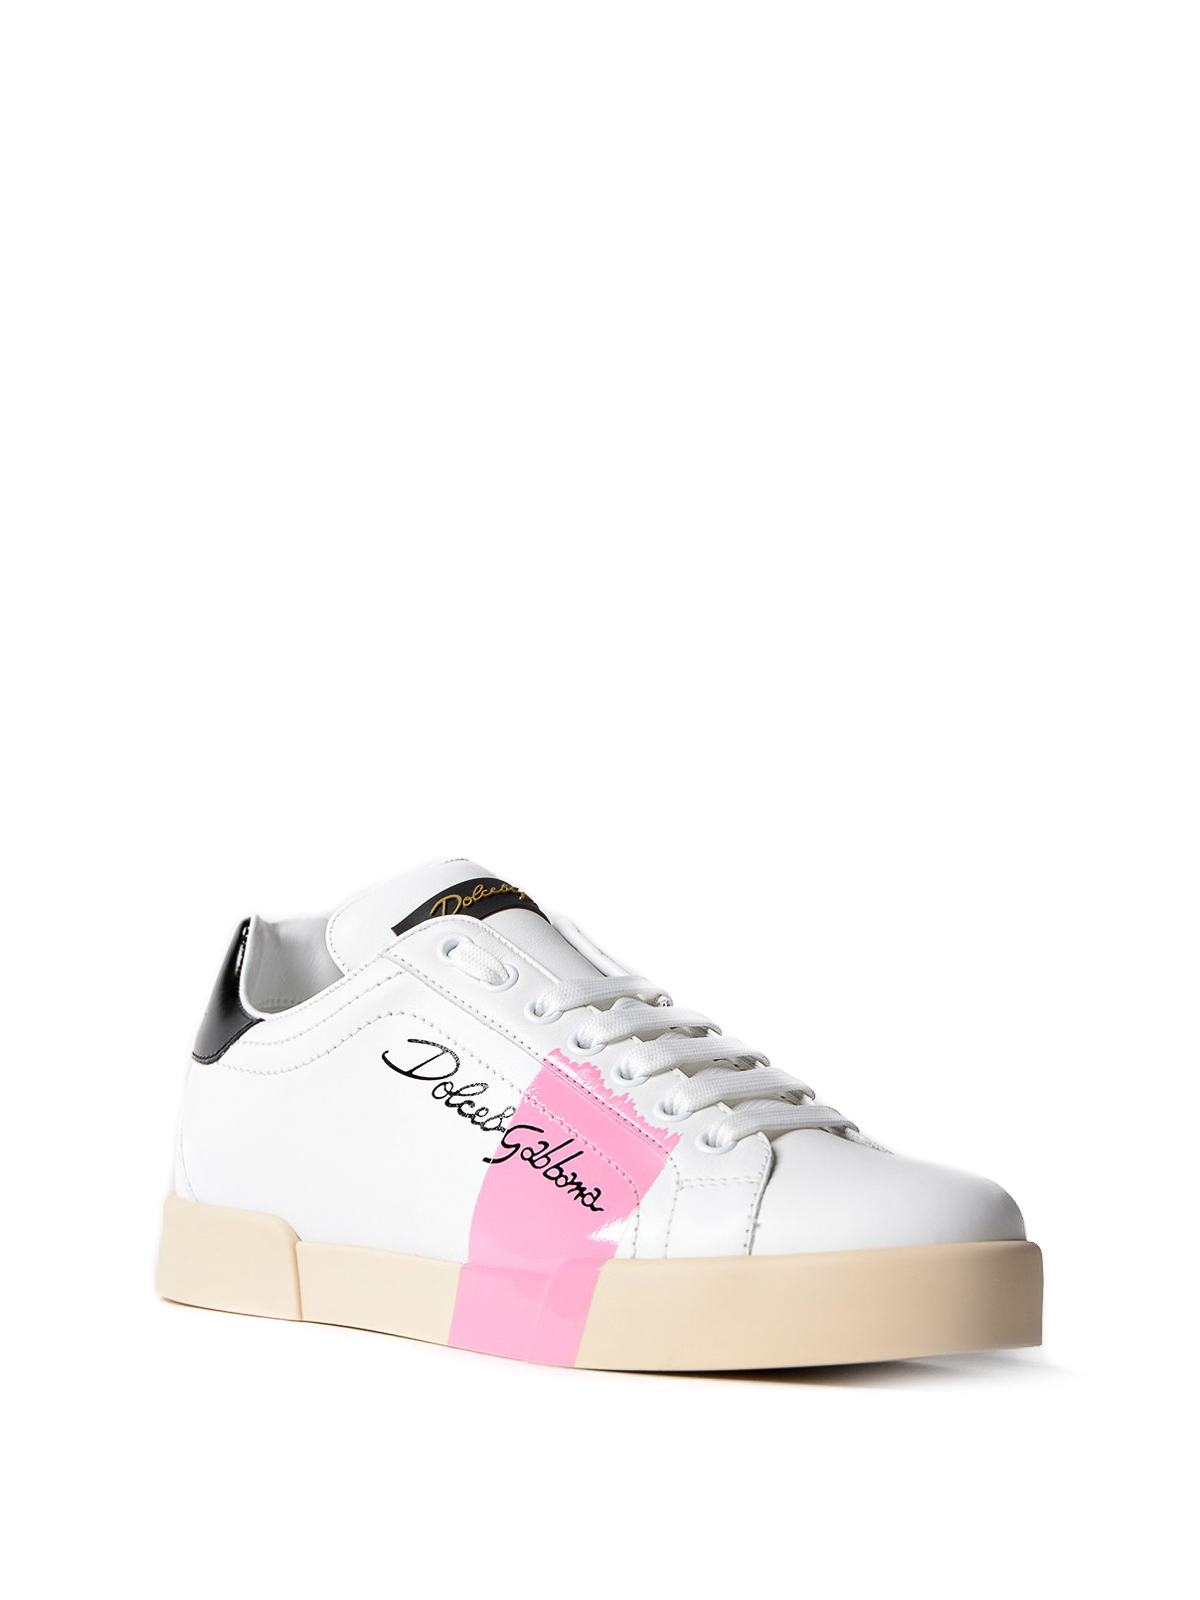 Gabbana - Pink detail leather sneakers 